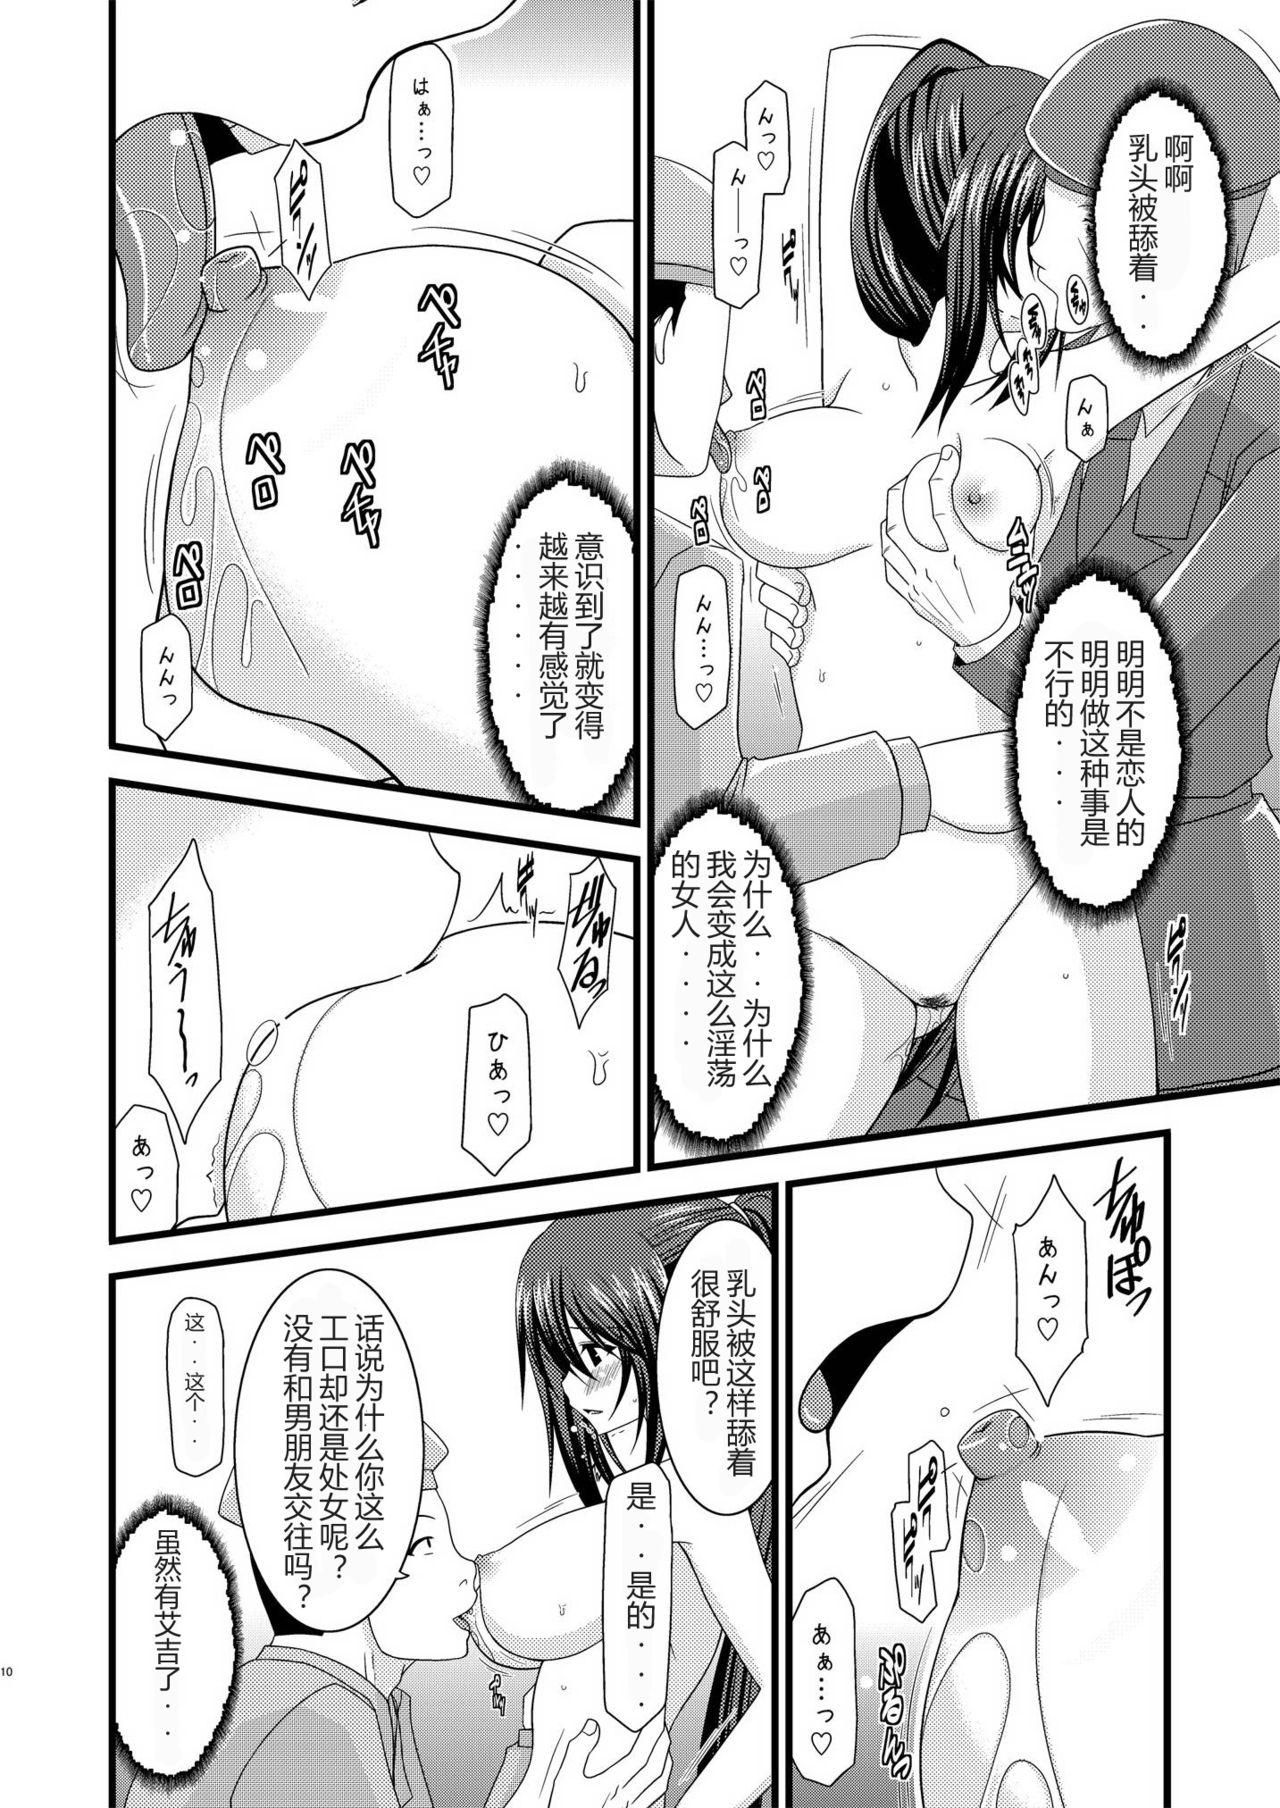 Thong ANOTHER OCEAN 2 - Star ocean 4 Jacking Off - Page 10